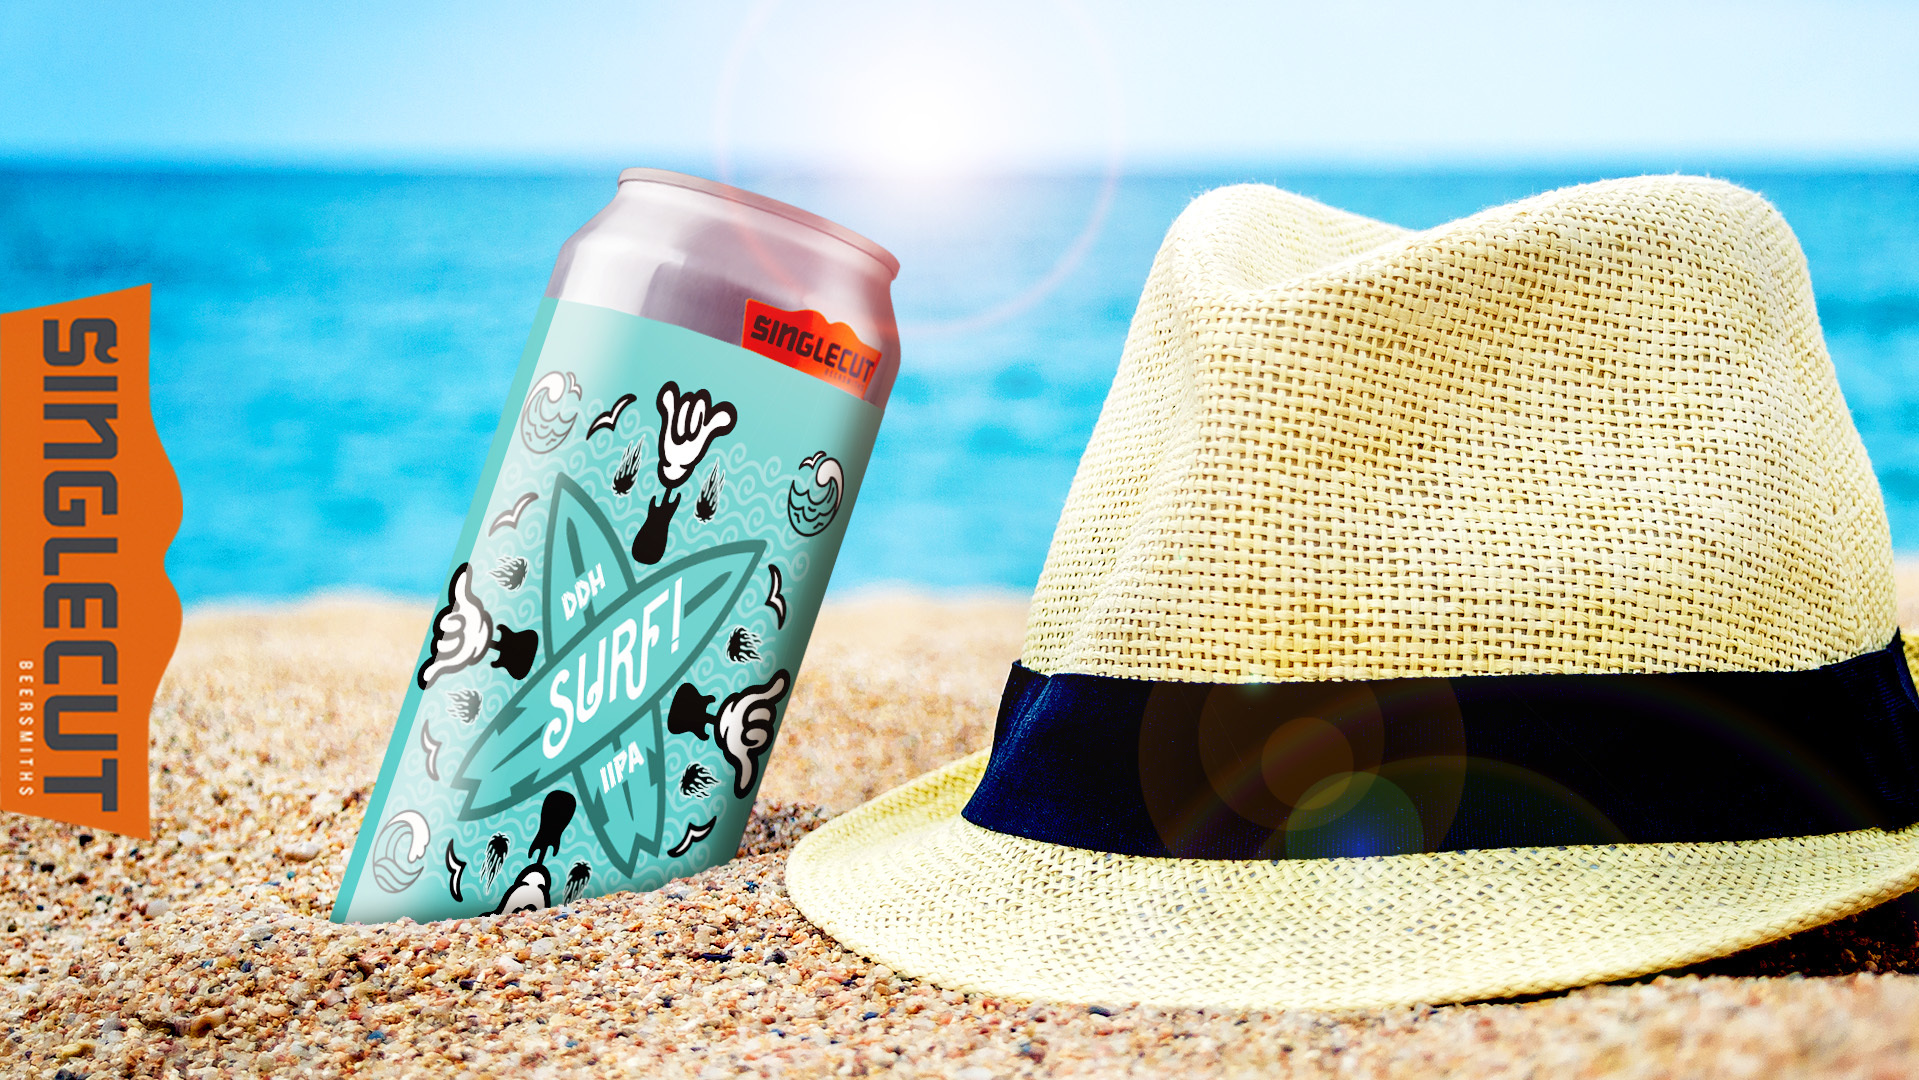 a can of beer called "surf" half buried in a the sand on a beach with a blue sky and a hat.